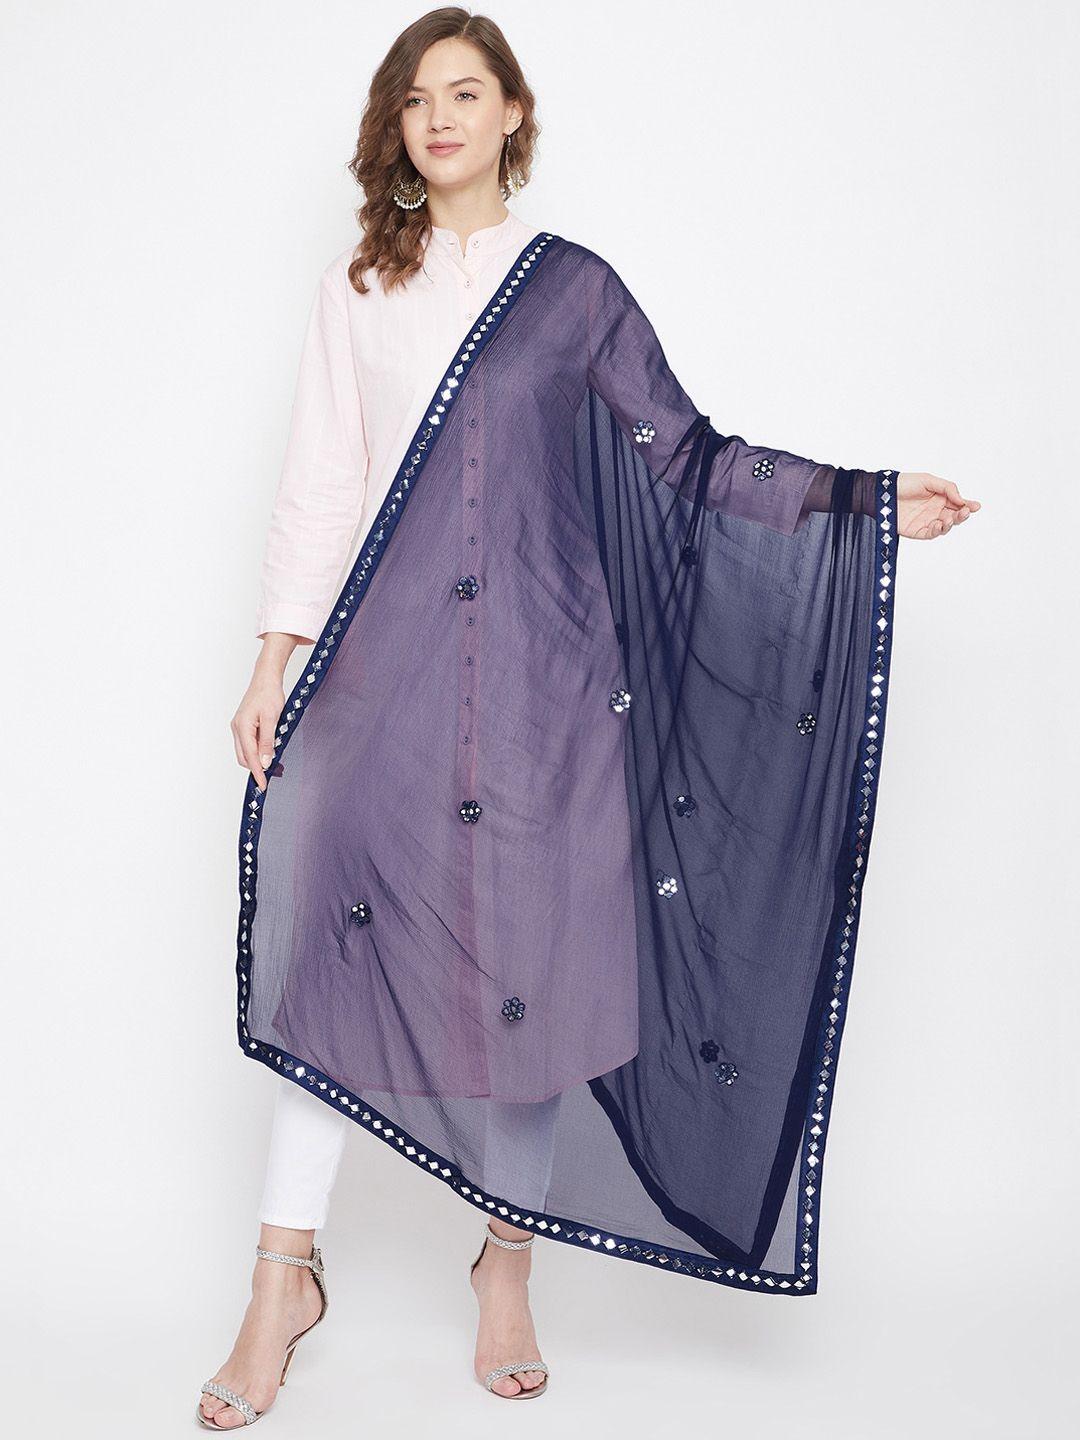 clora-creation-navy-blue-&-silver-toned-solid-dupatta